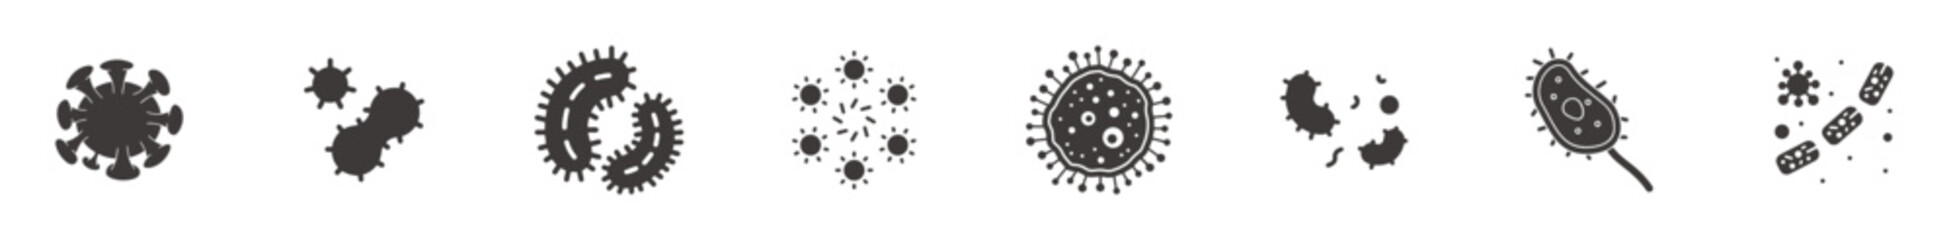 Bacteria virus icons set. Simple set of bacteria virus vector icons for web design on white background
